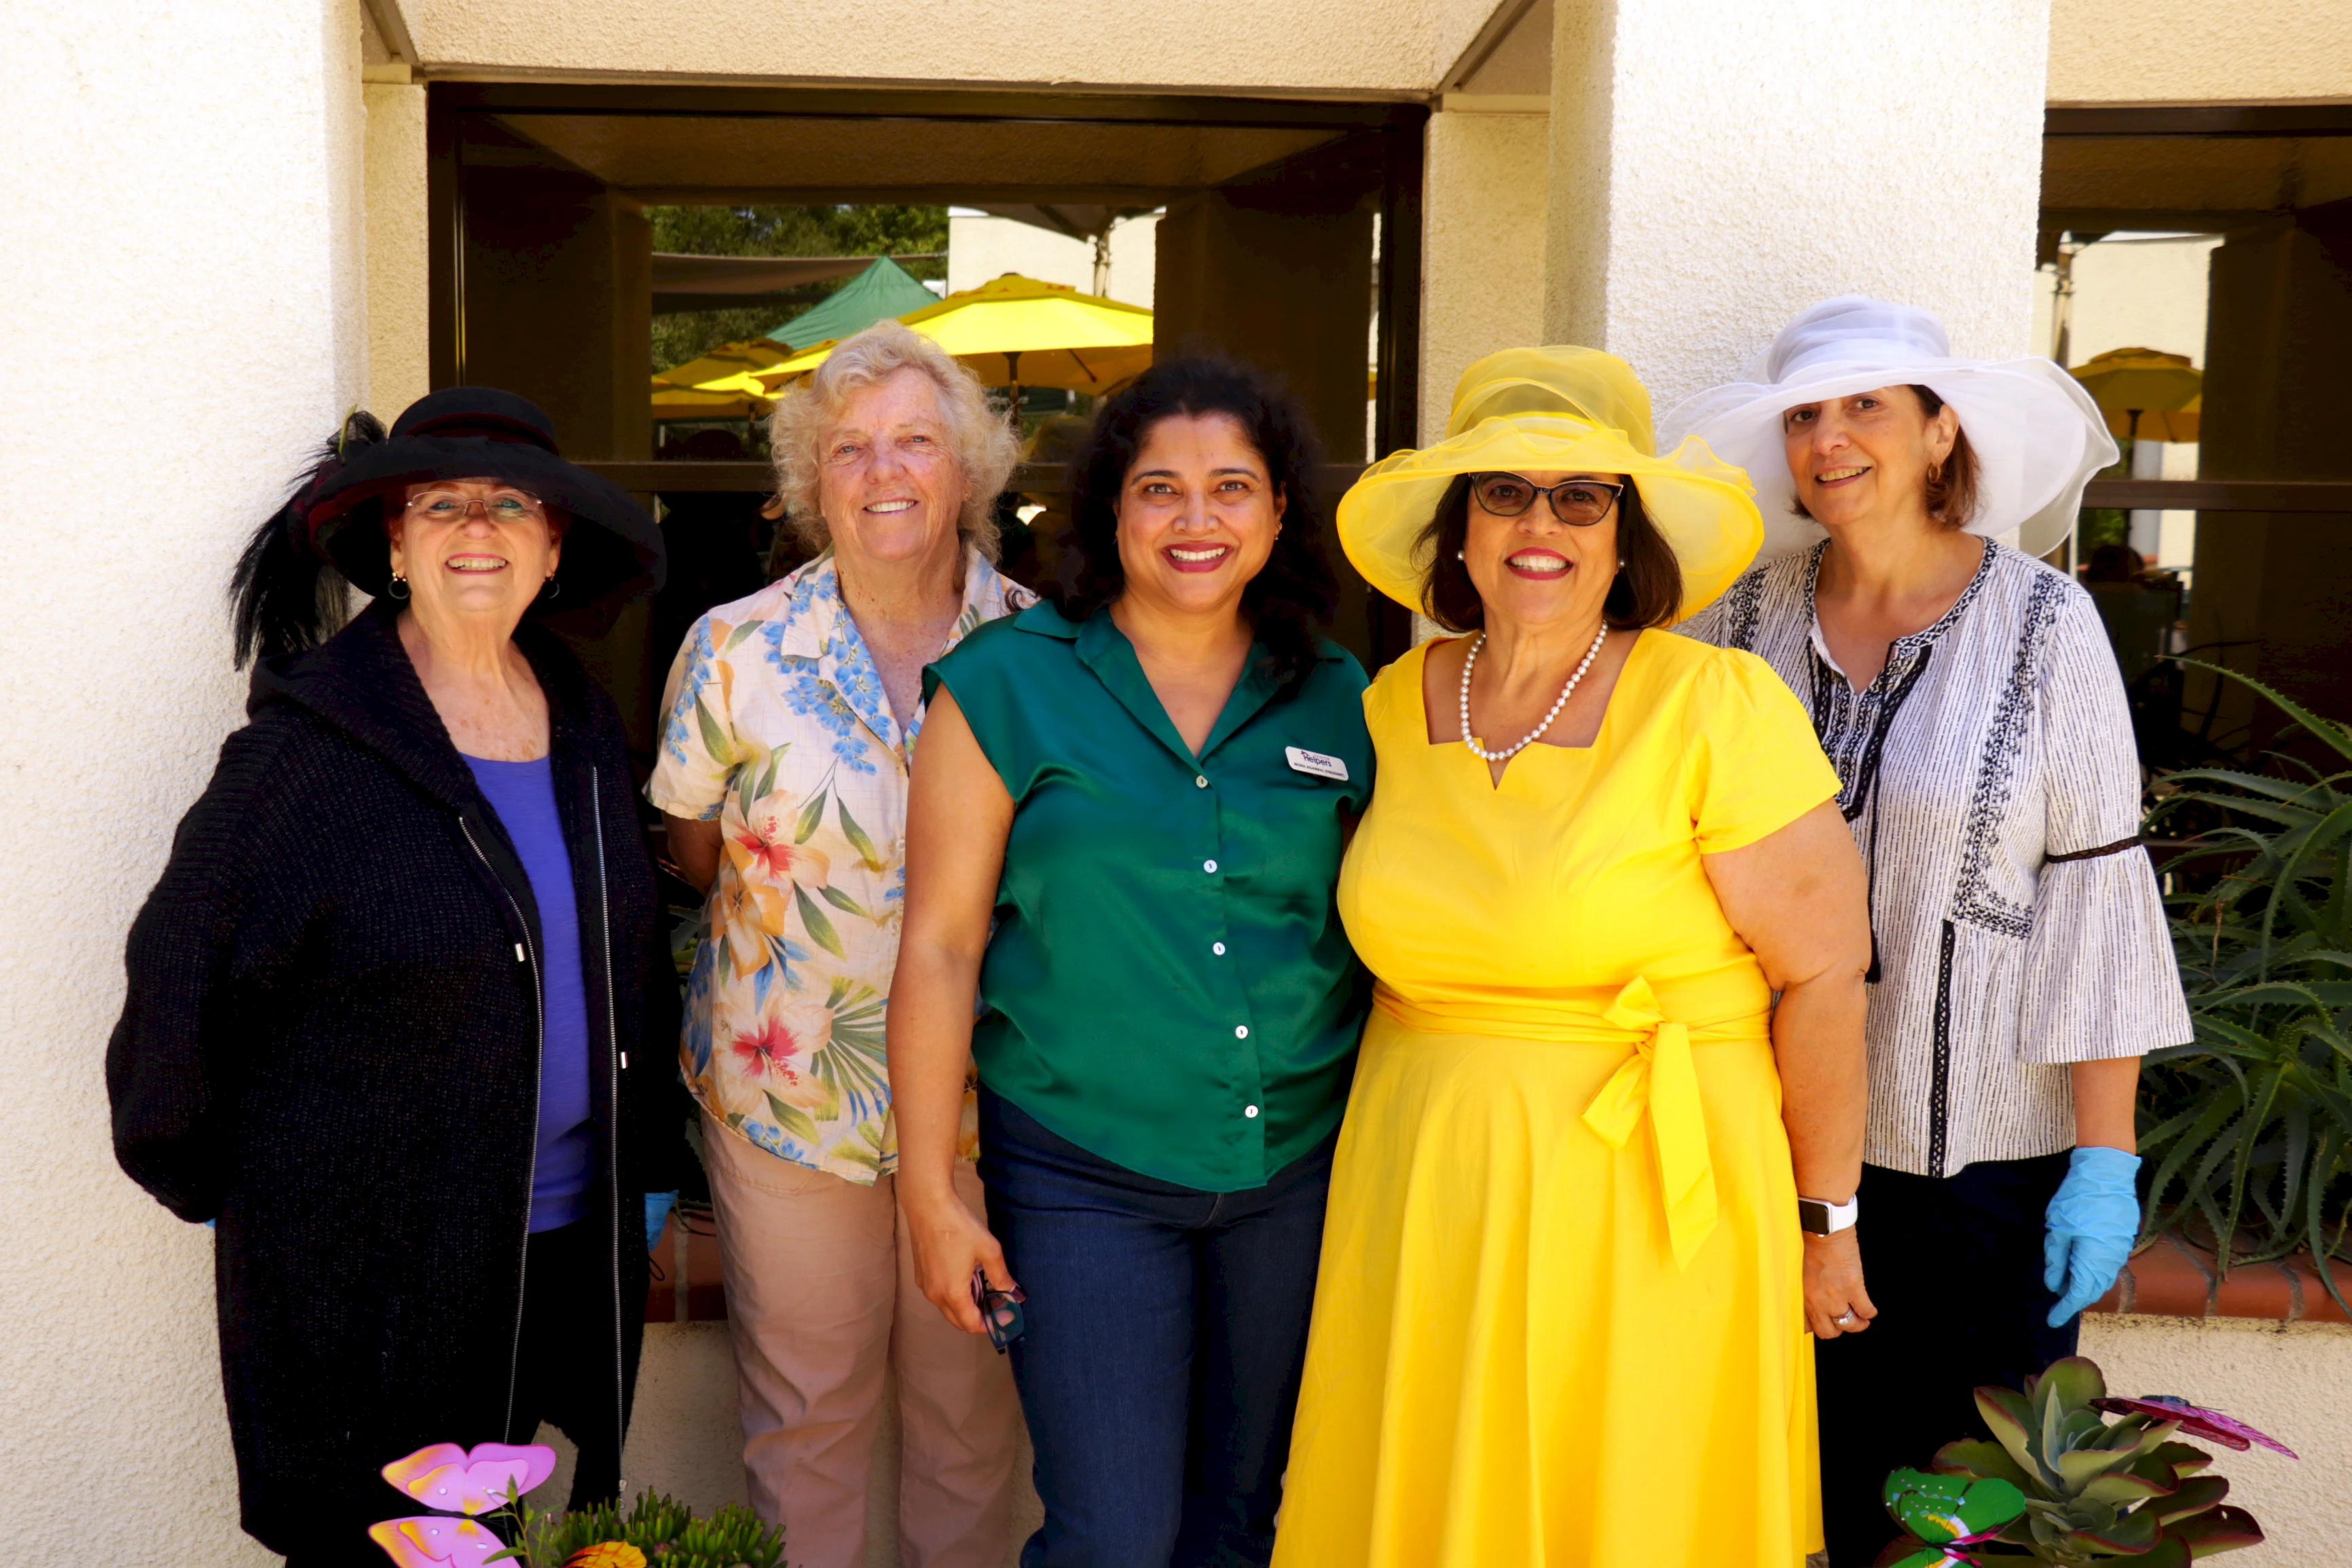 Our president, Mona, had the chance to volunteer at the annual Mother’s Day Tea party at the Goebel Adult Community Center. The Goebel Center did an amazing job of hosting this event with a great turnout out and variety of delicious tea & sandwiches!